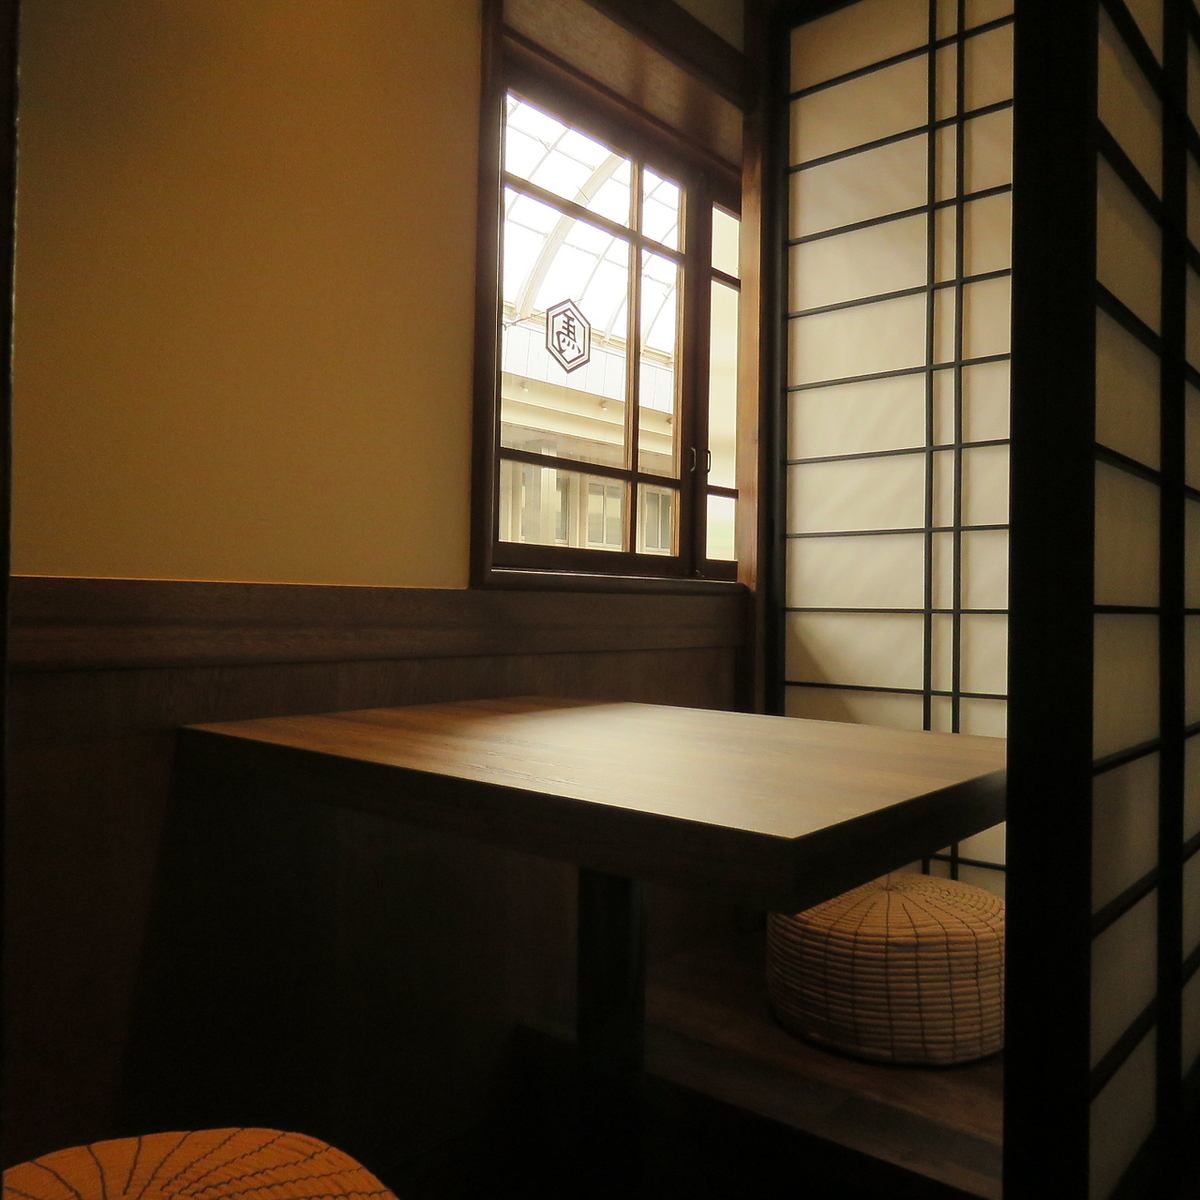 ◆We will guide you to a private room with a great atmosphere!Enjoy it with our proud sake